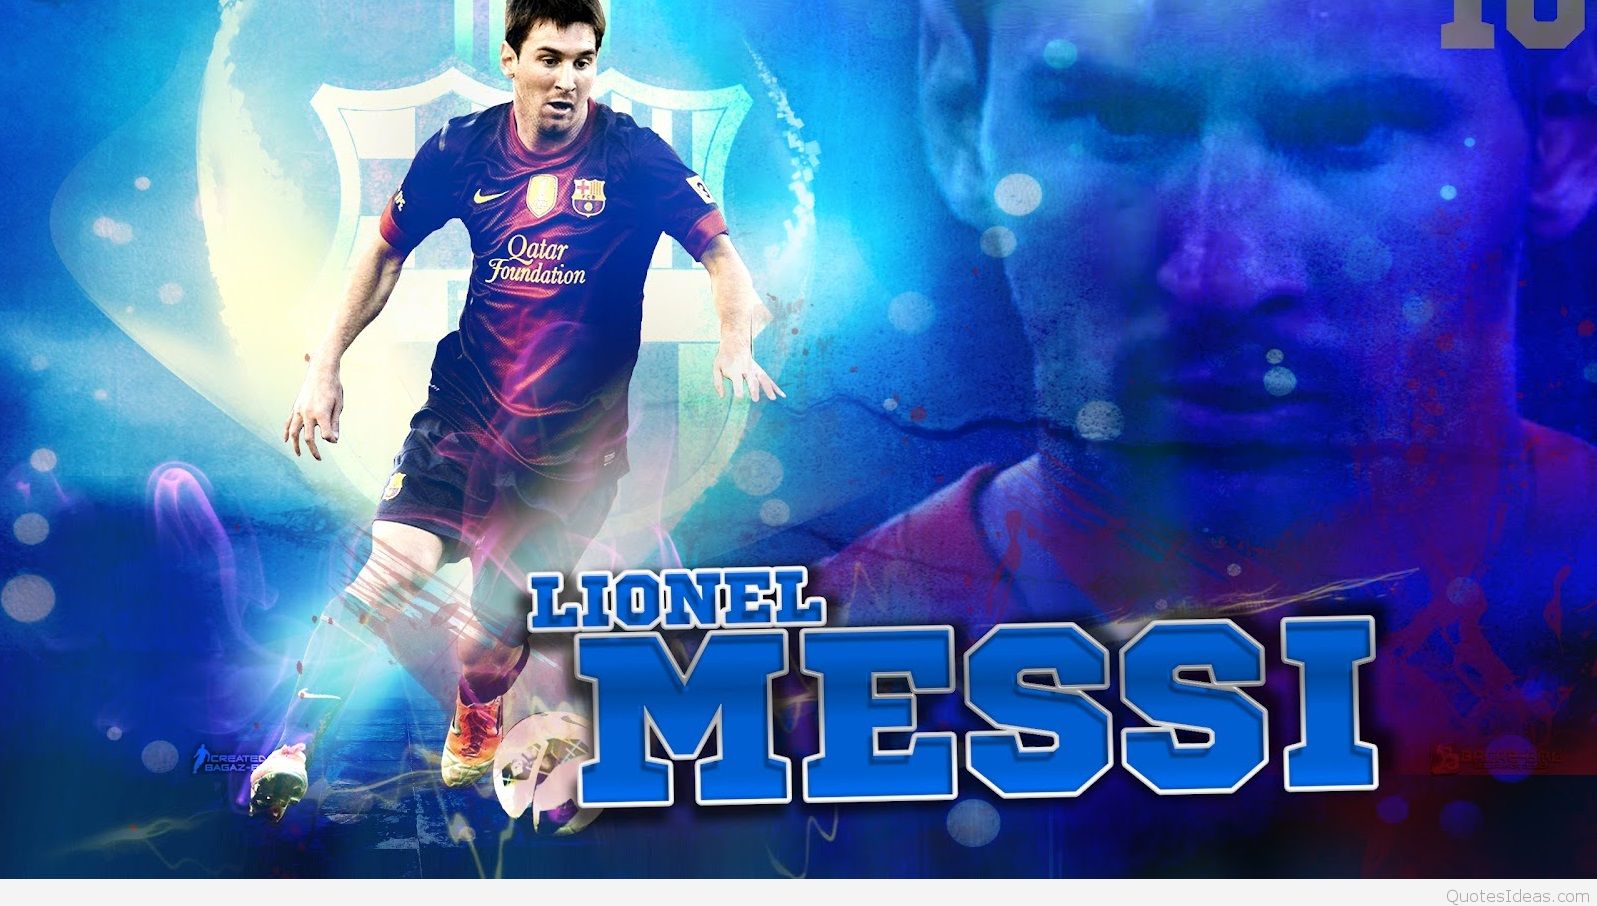 Messi Wallpaper Hd - Messi Wallpaper 2014 , HD Wallpaper & Backgrounds